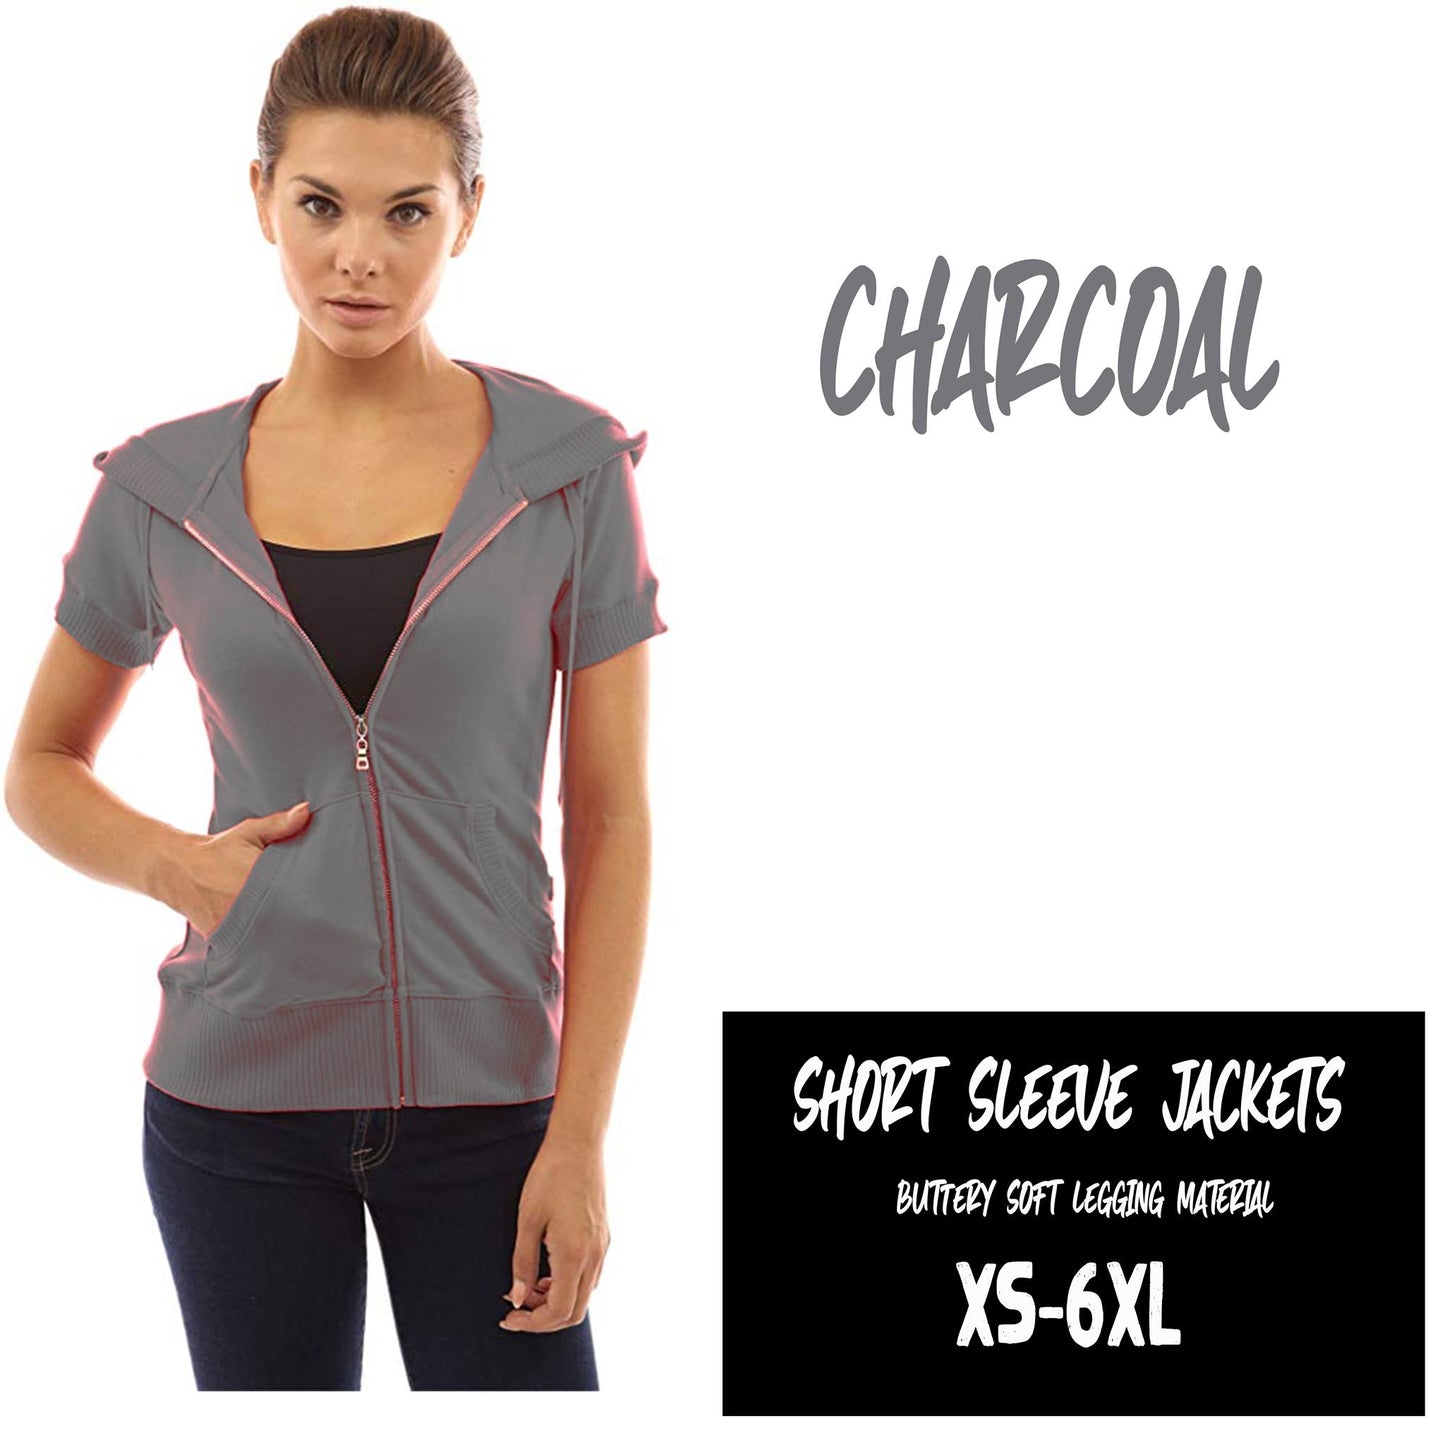 LC Run-SOLID SHORT SLEEVE JACKETS-CHARCOAL